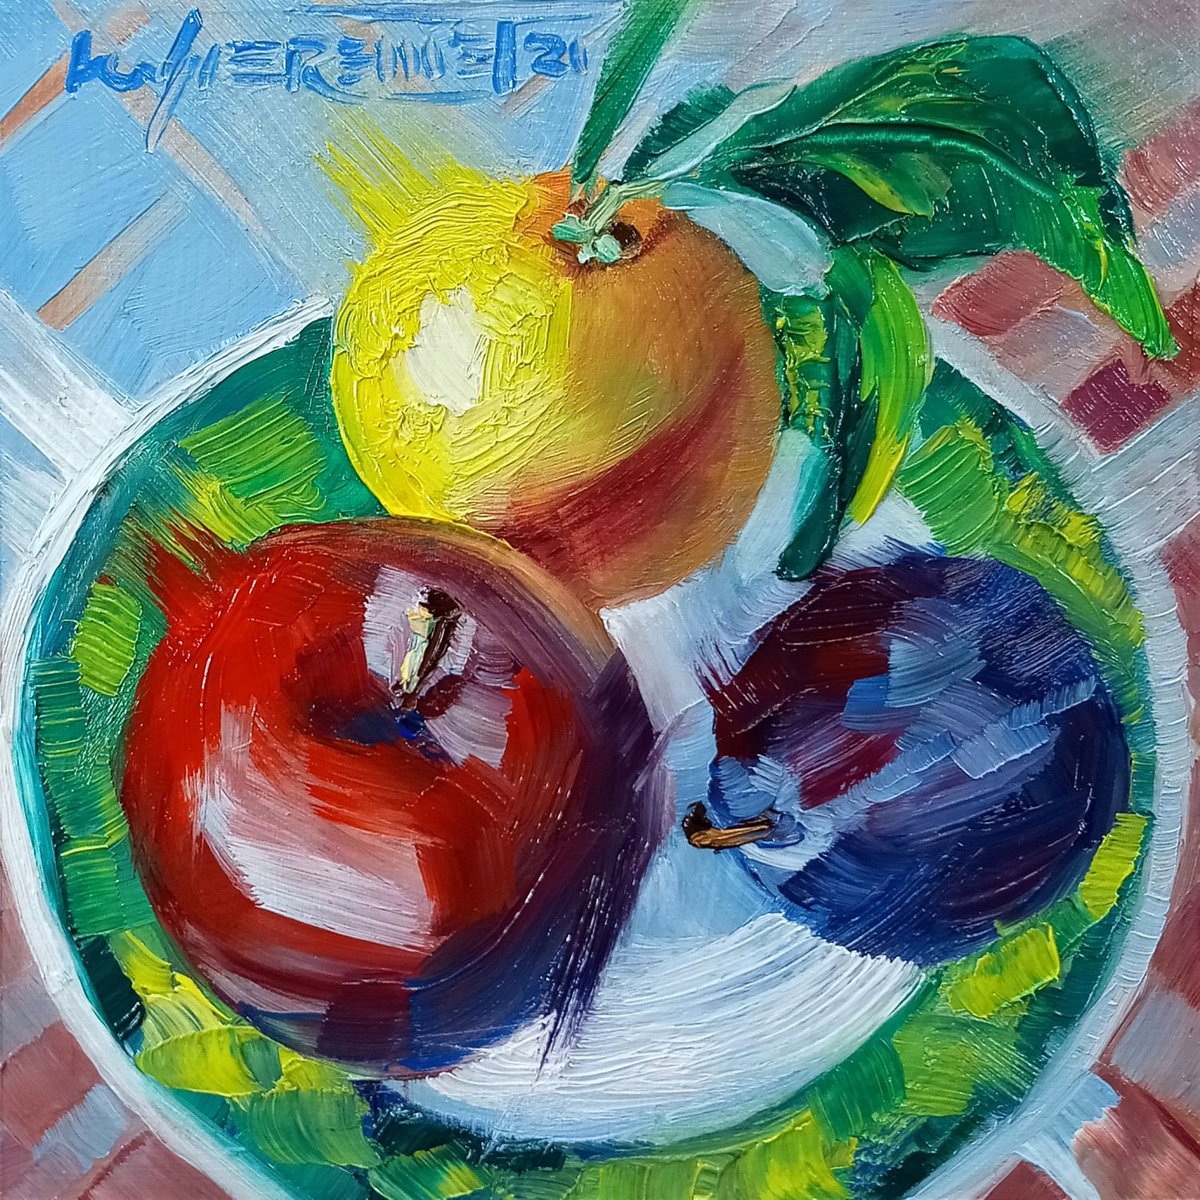 Apple, Plum and Orange - Healthy Fruits Still Life by Ion Sheremet